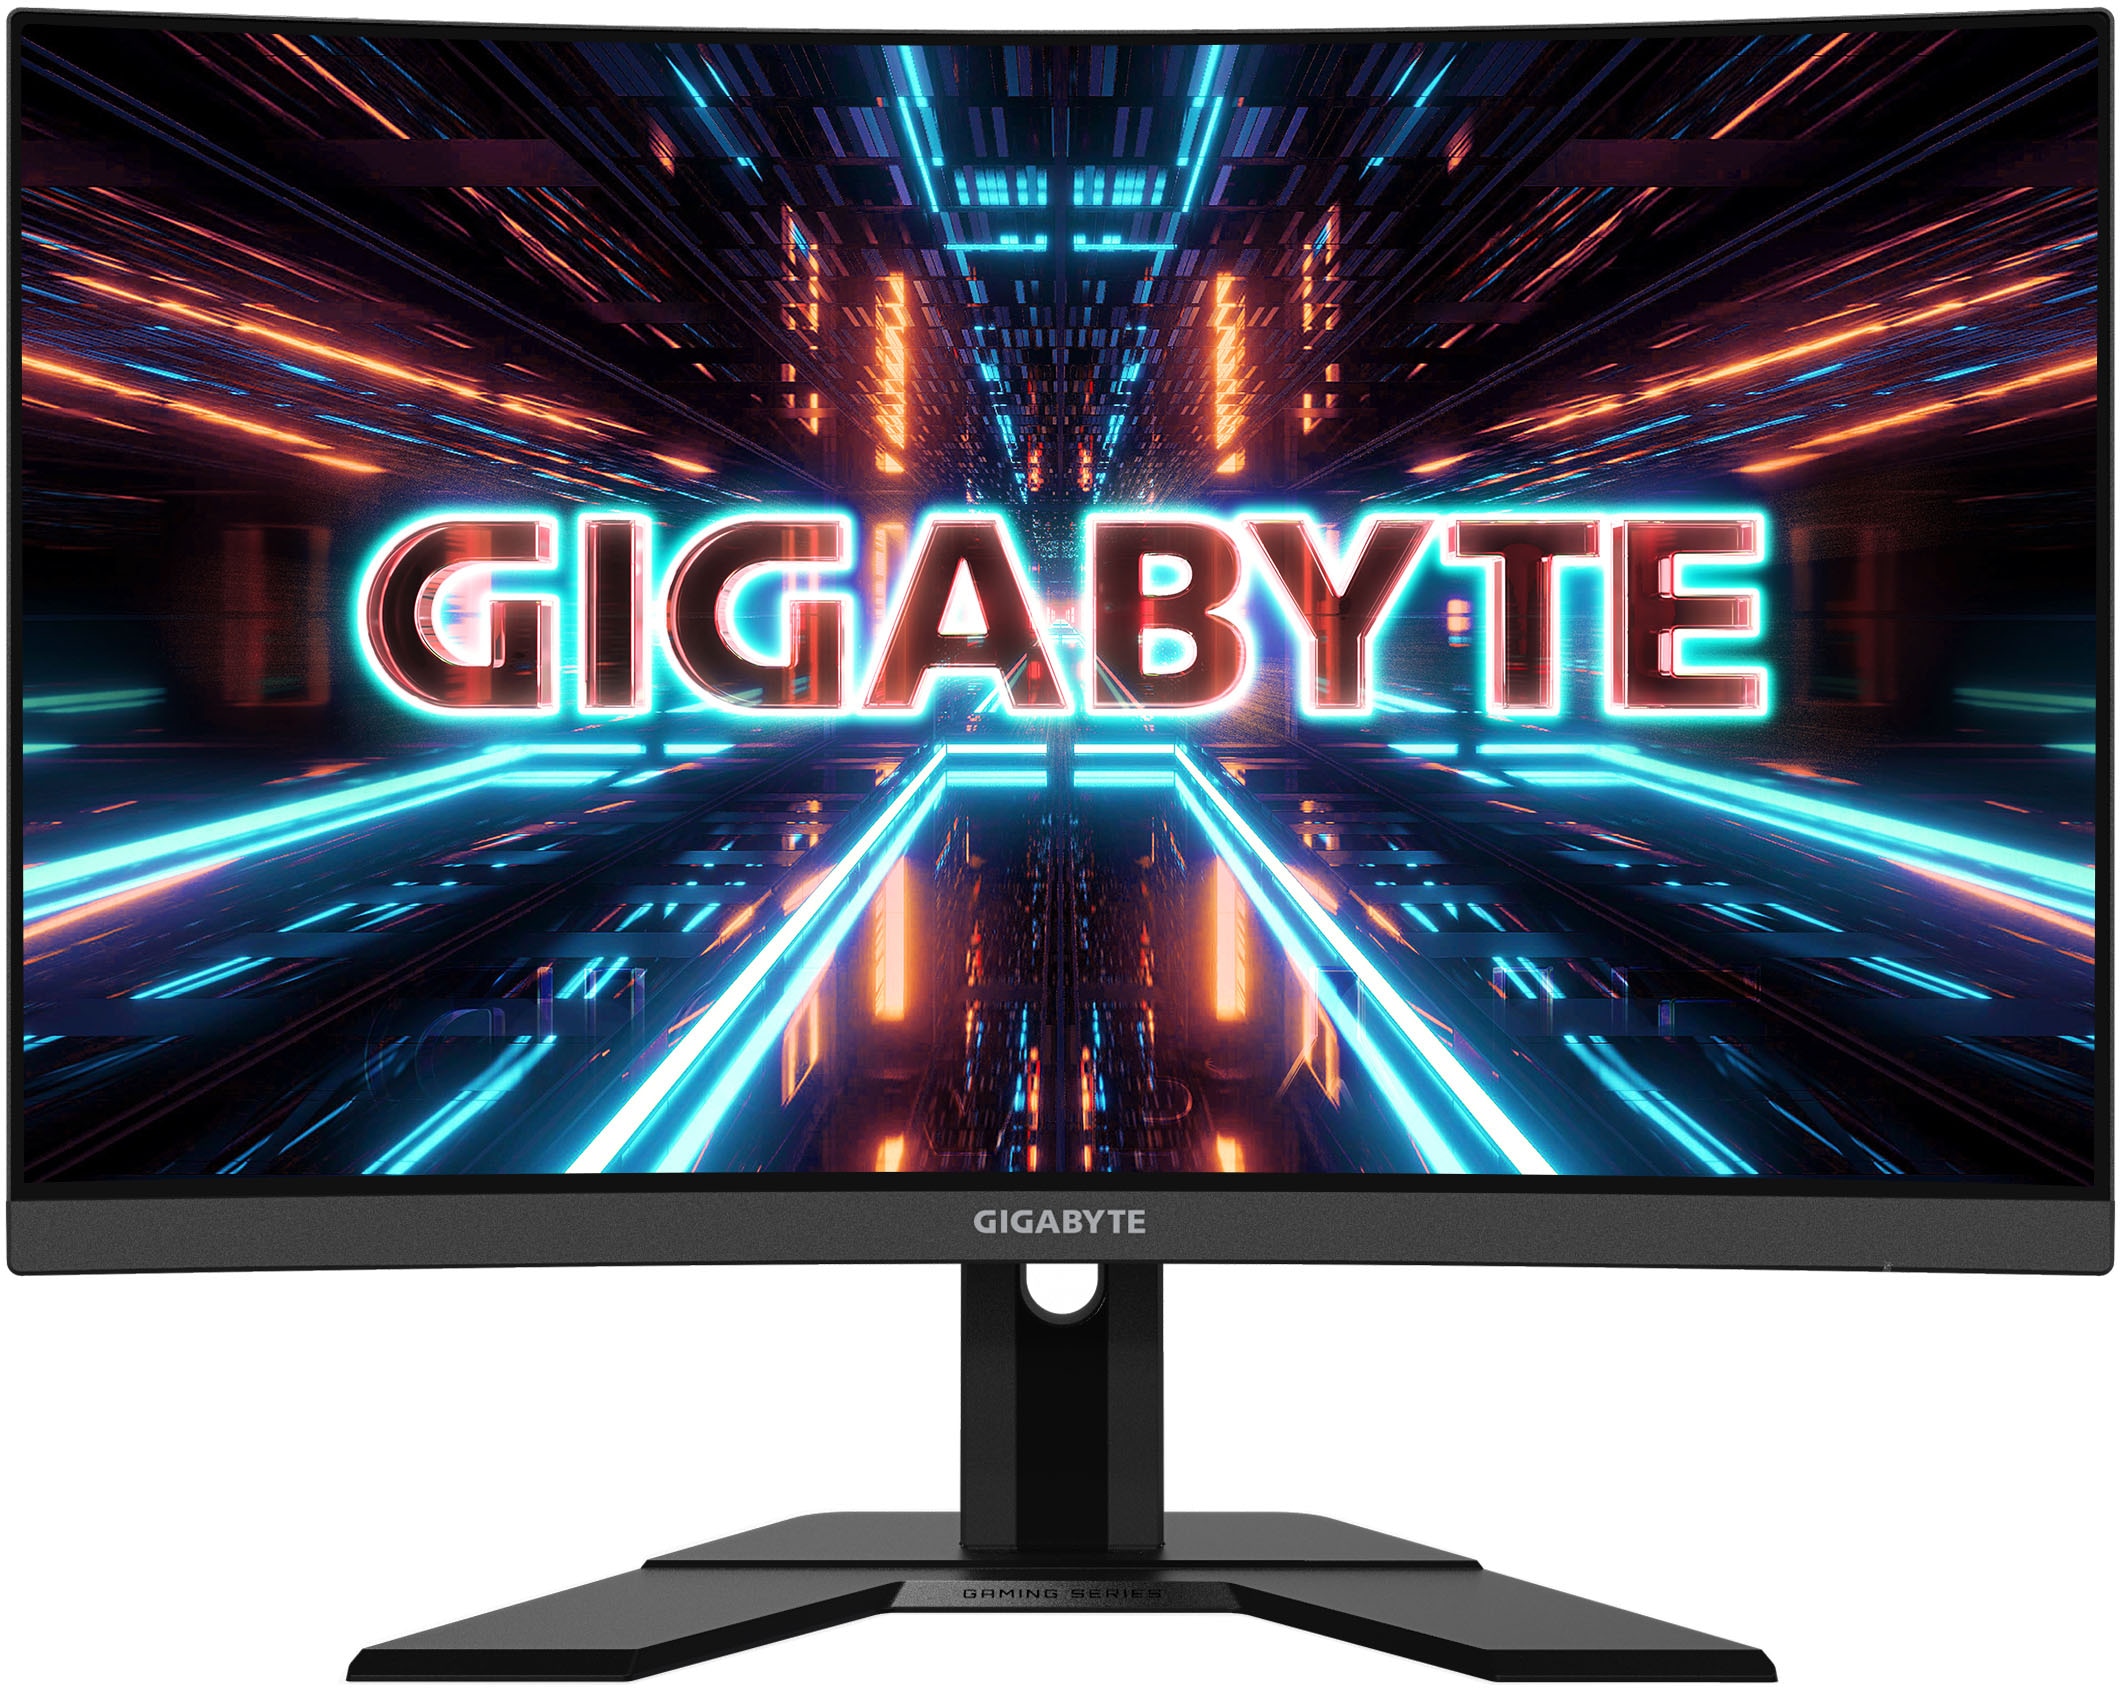 Gigabyte Curved-Gaming-Monitor »G27QC A«, 68,5 cm/27 Zoll, 2560 x 1440 px, QHD, 1 ms Reaktionszeit, 165 Hz